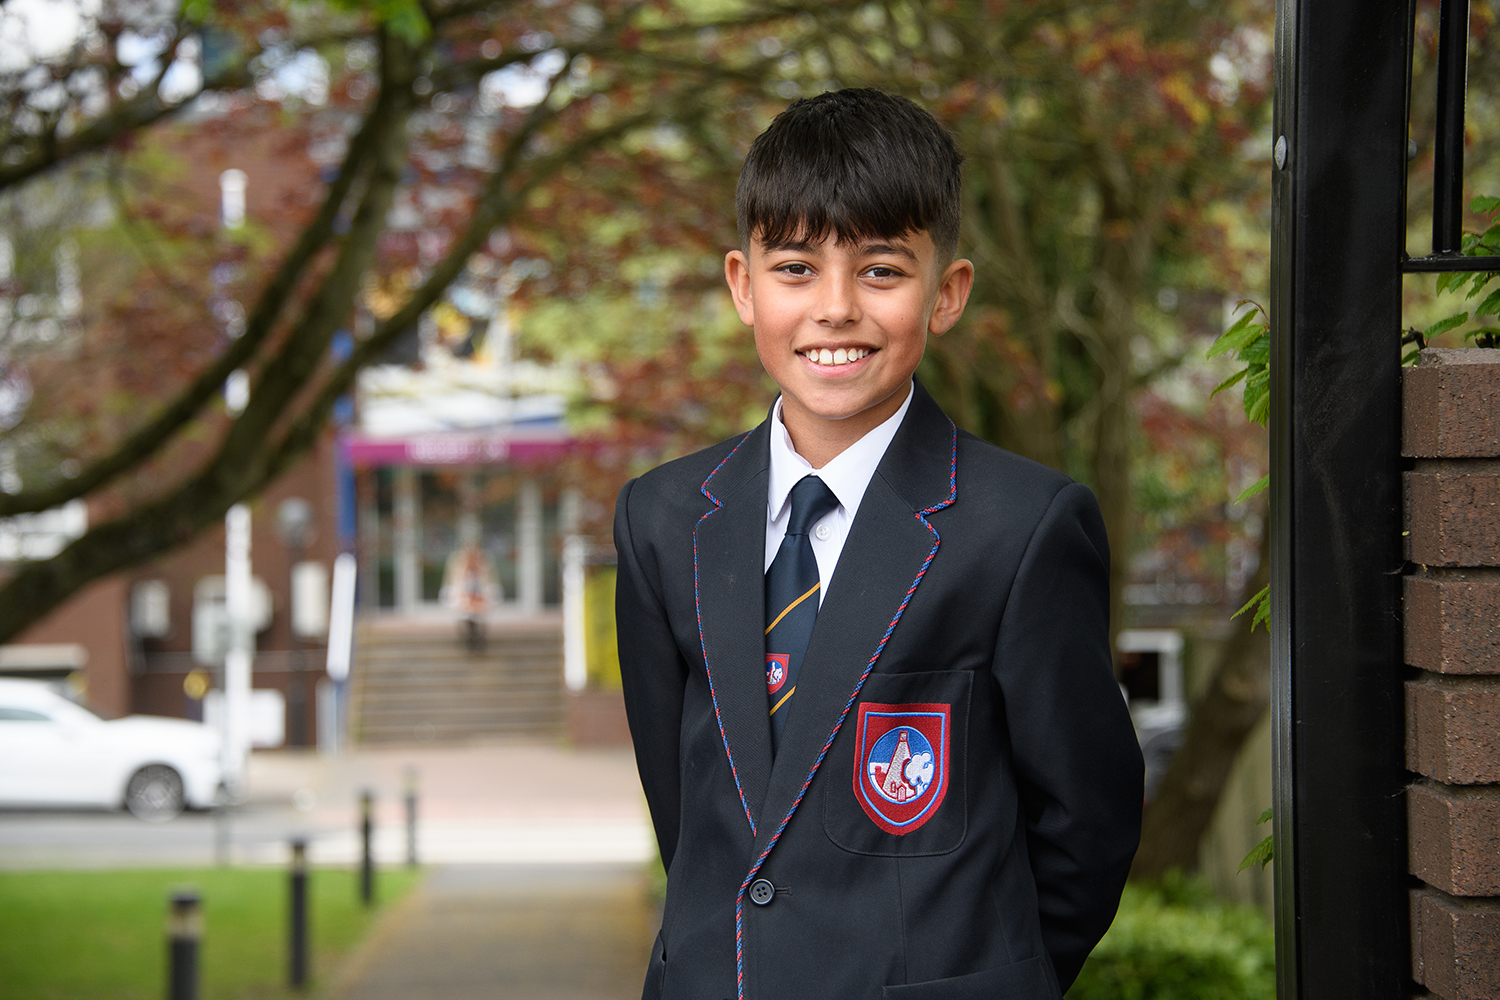 Boy student in uniform smiling in front of school entrance